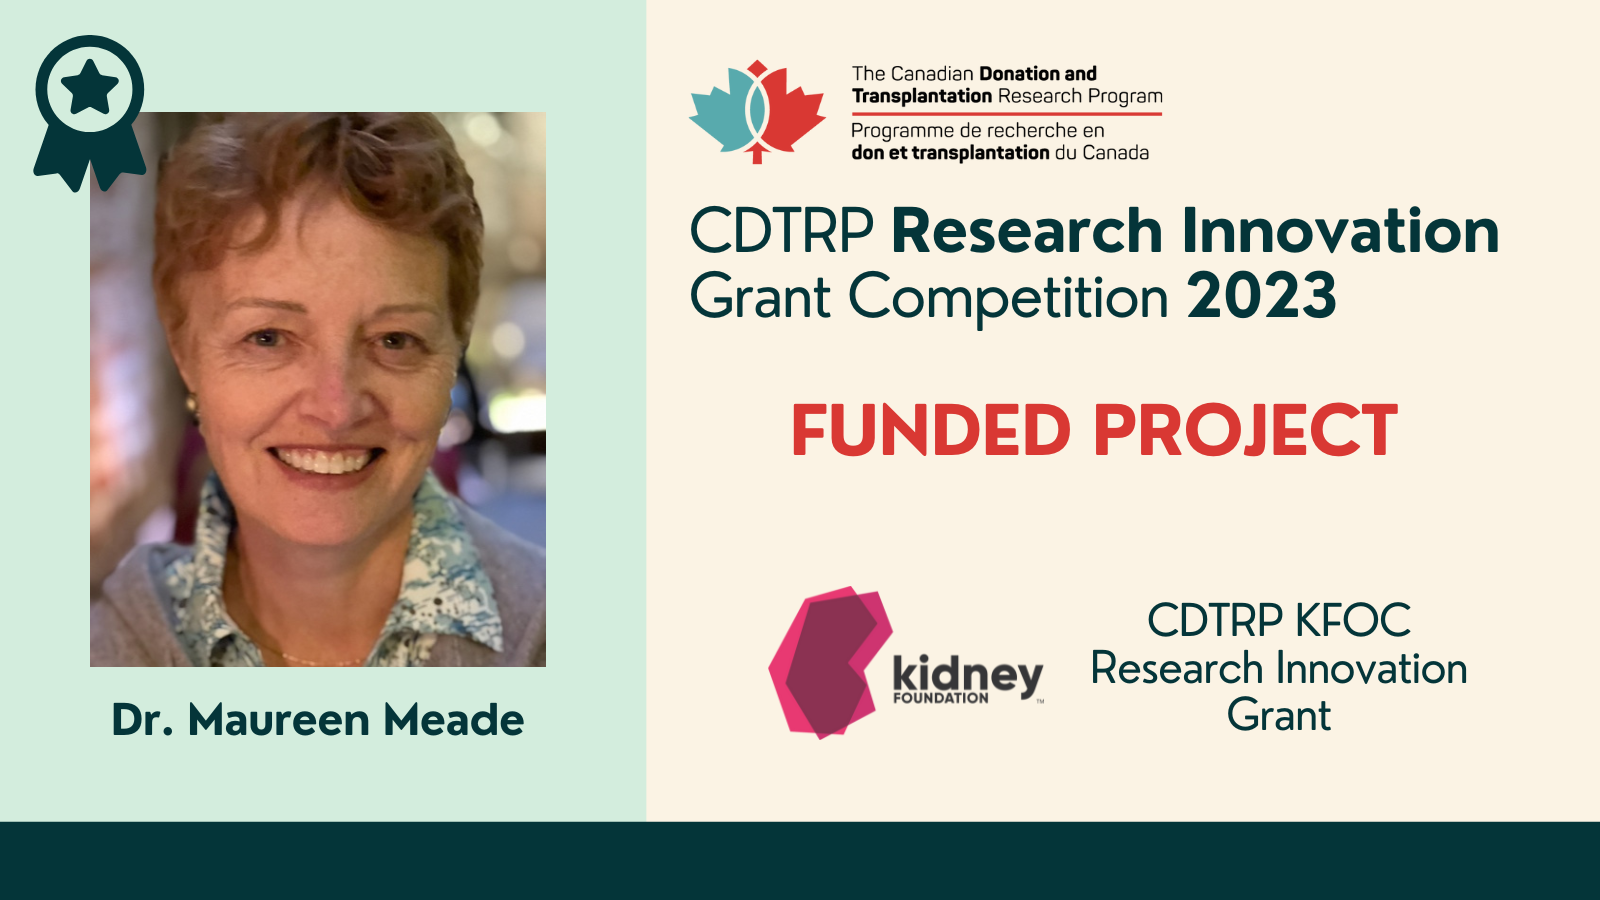 CDTRP KFOC Research Innovation Grant Dr image